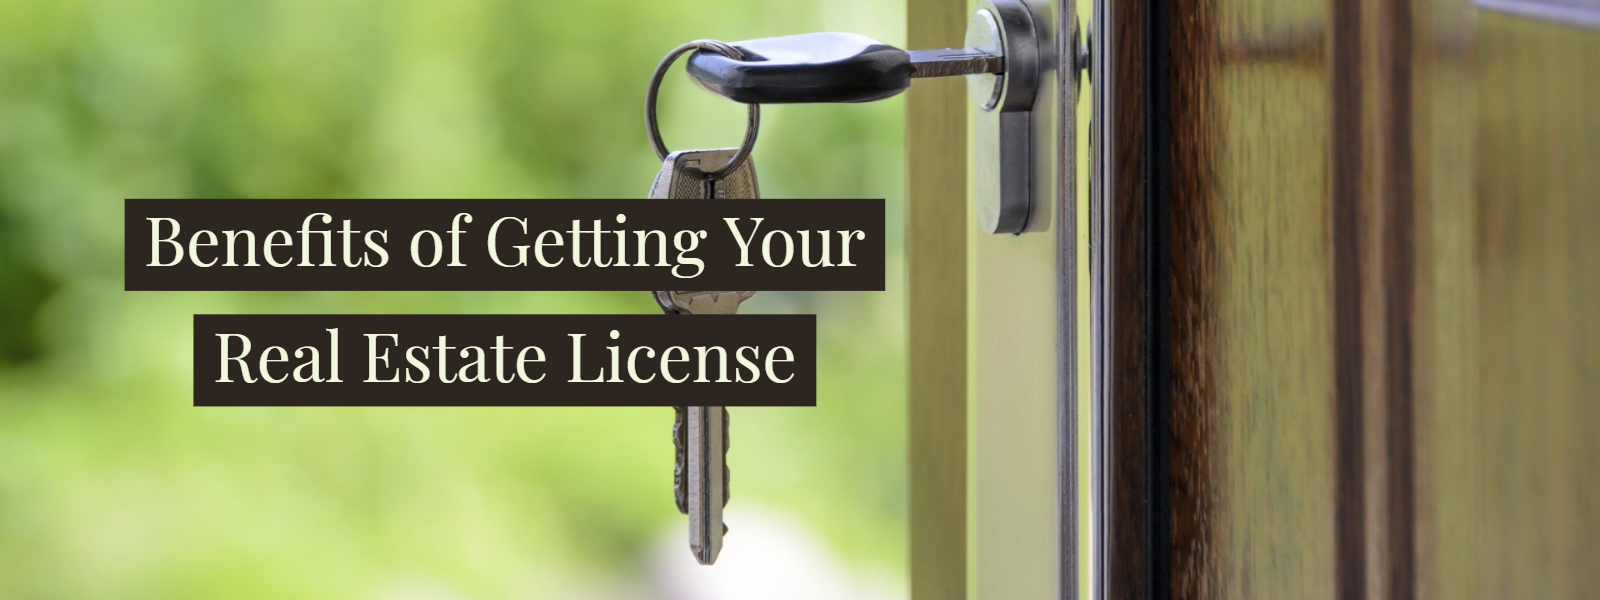  “Benefits of Getting Your Real Estate License” No.